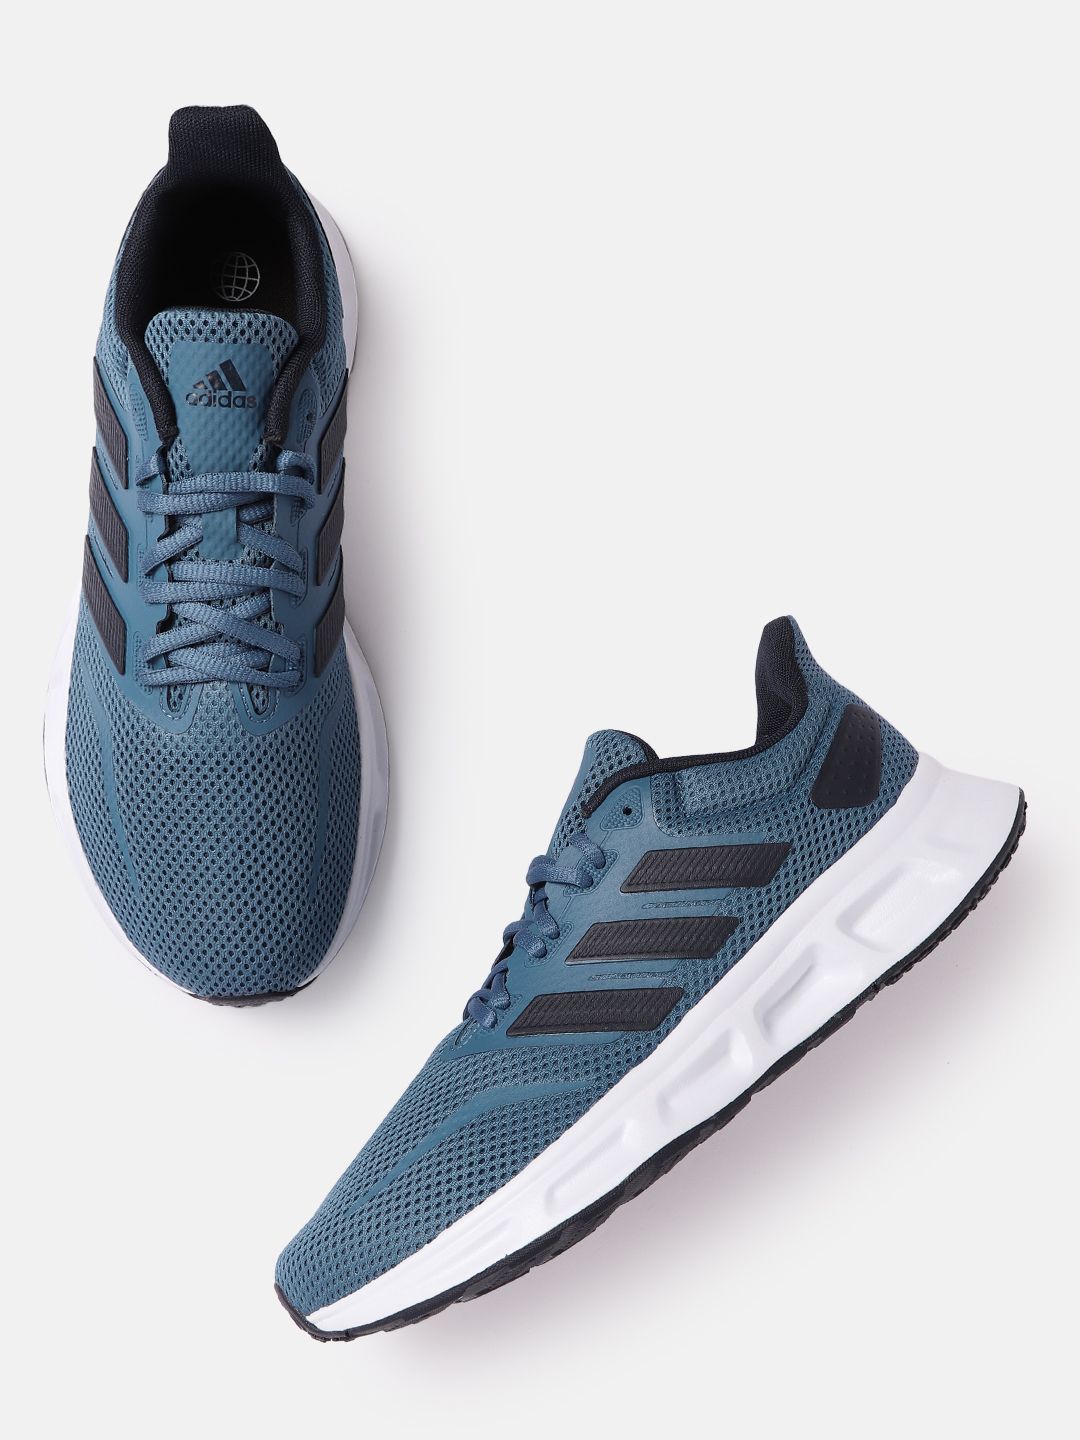 ADIDAS Unisex Teal Blue Woven Design Showtheway 2.0 Sustainable Running Shoes Price in India